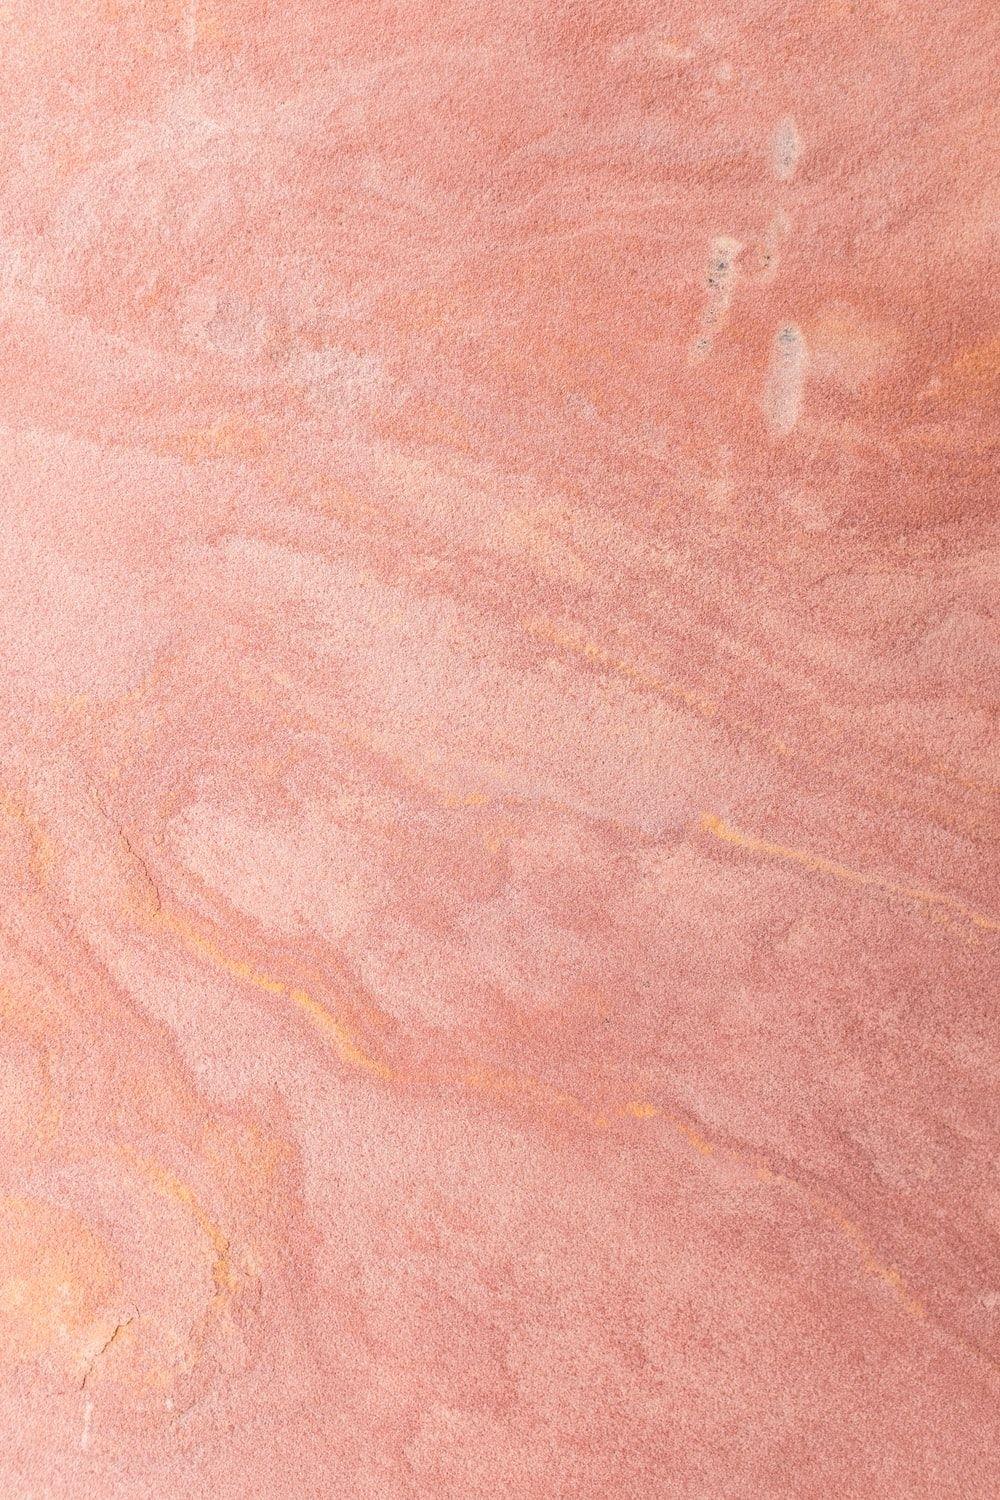 Pink Texture Wallpapers - Top Free Pink Texture Backgrounds